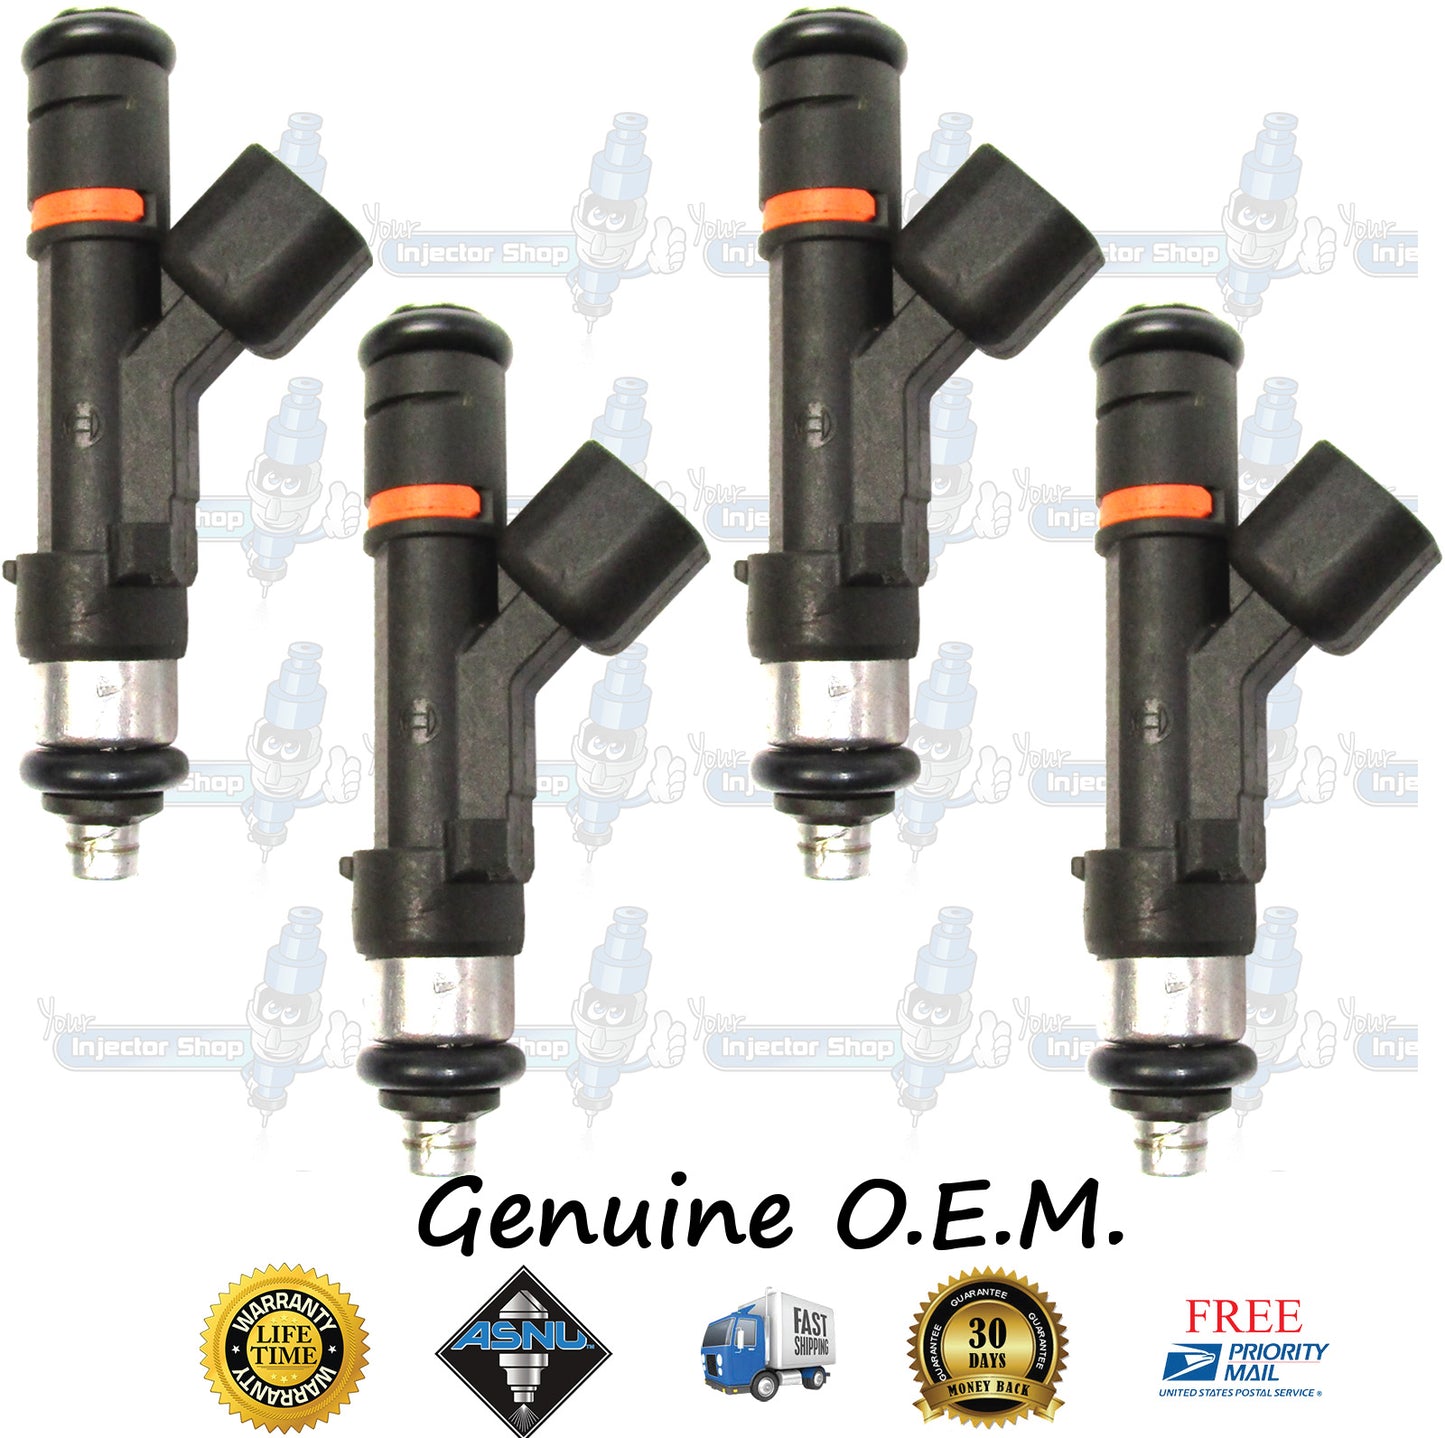 4x Genuine Ford Lincoln Fuel Injectors 8S4G-AA Bosch 0280158179 2.0L DOHC Duratec